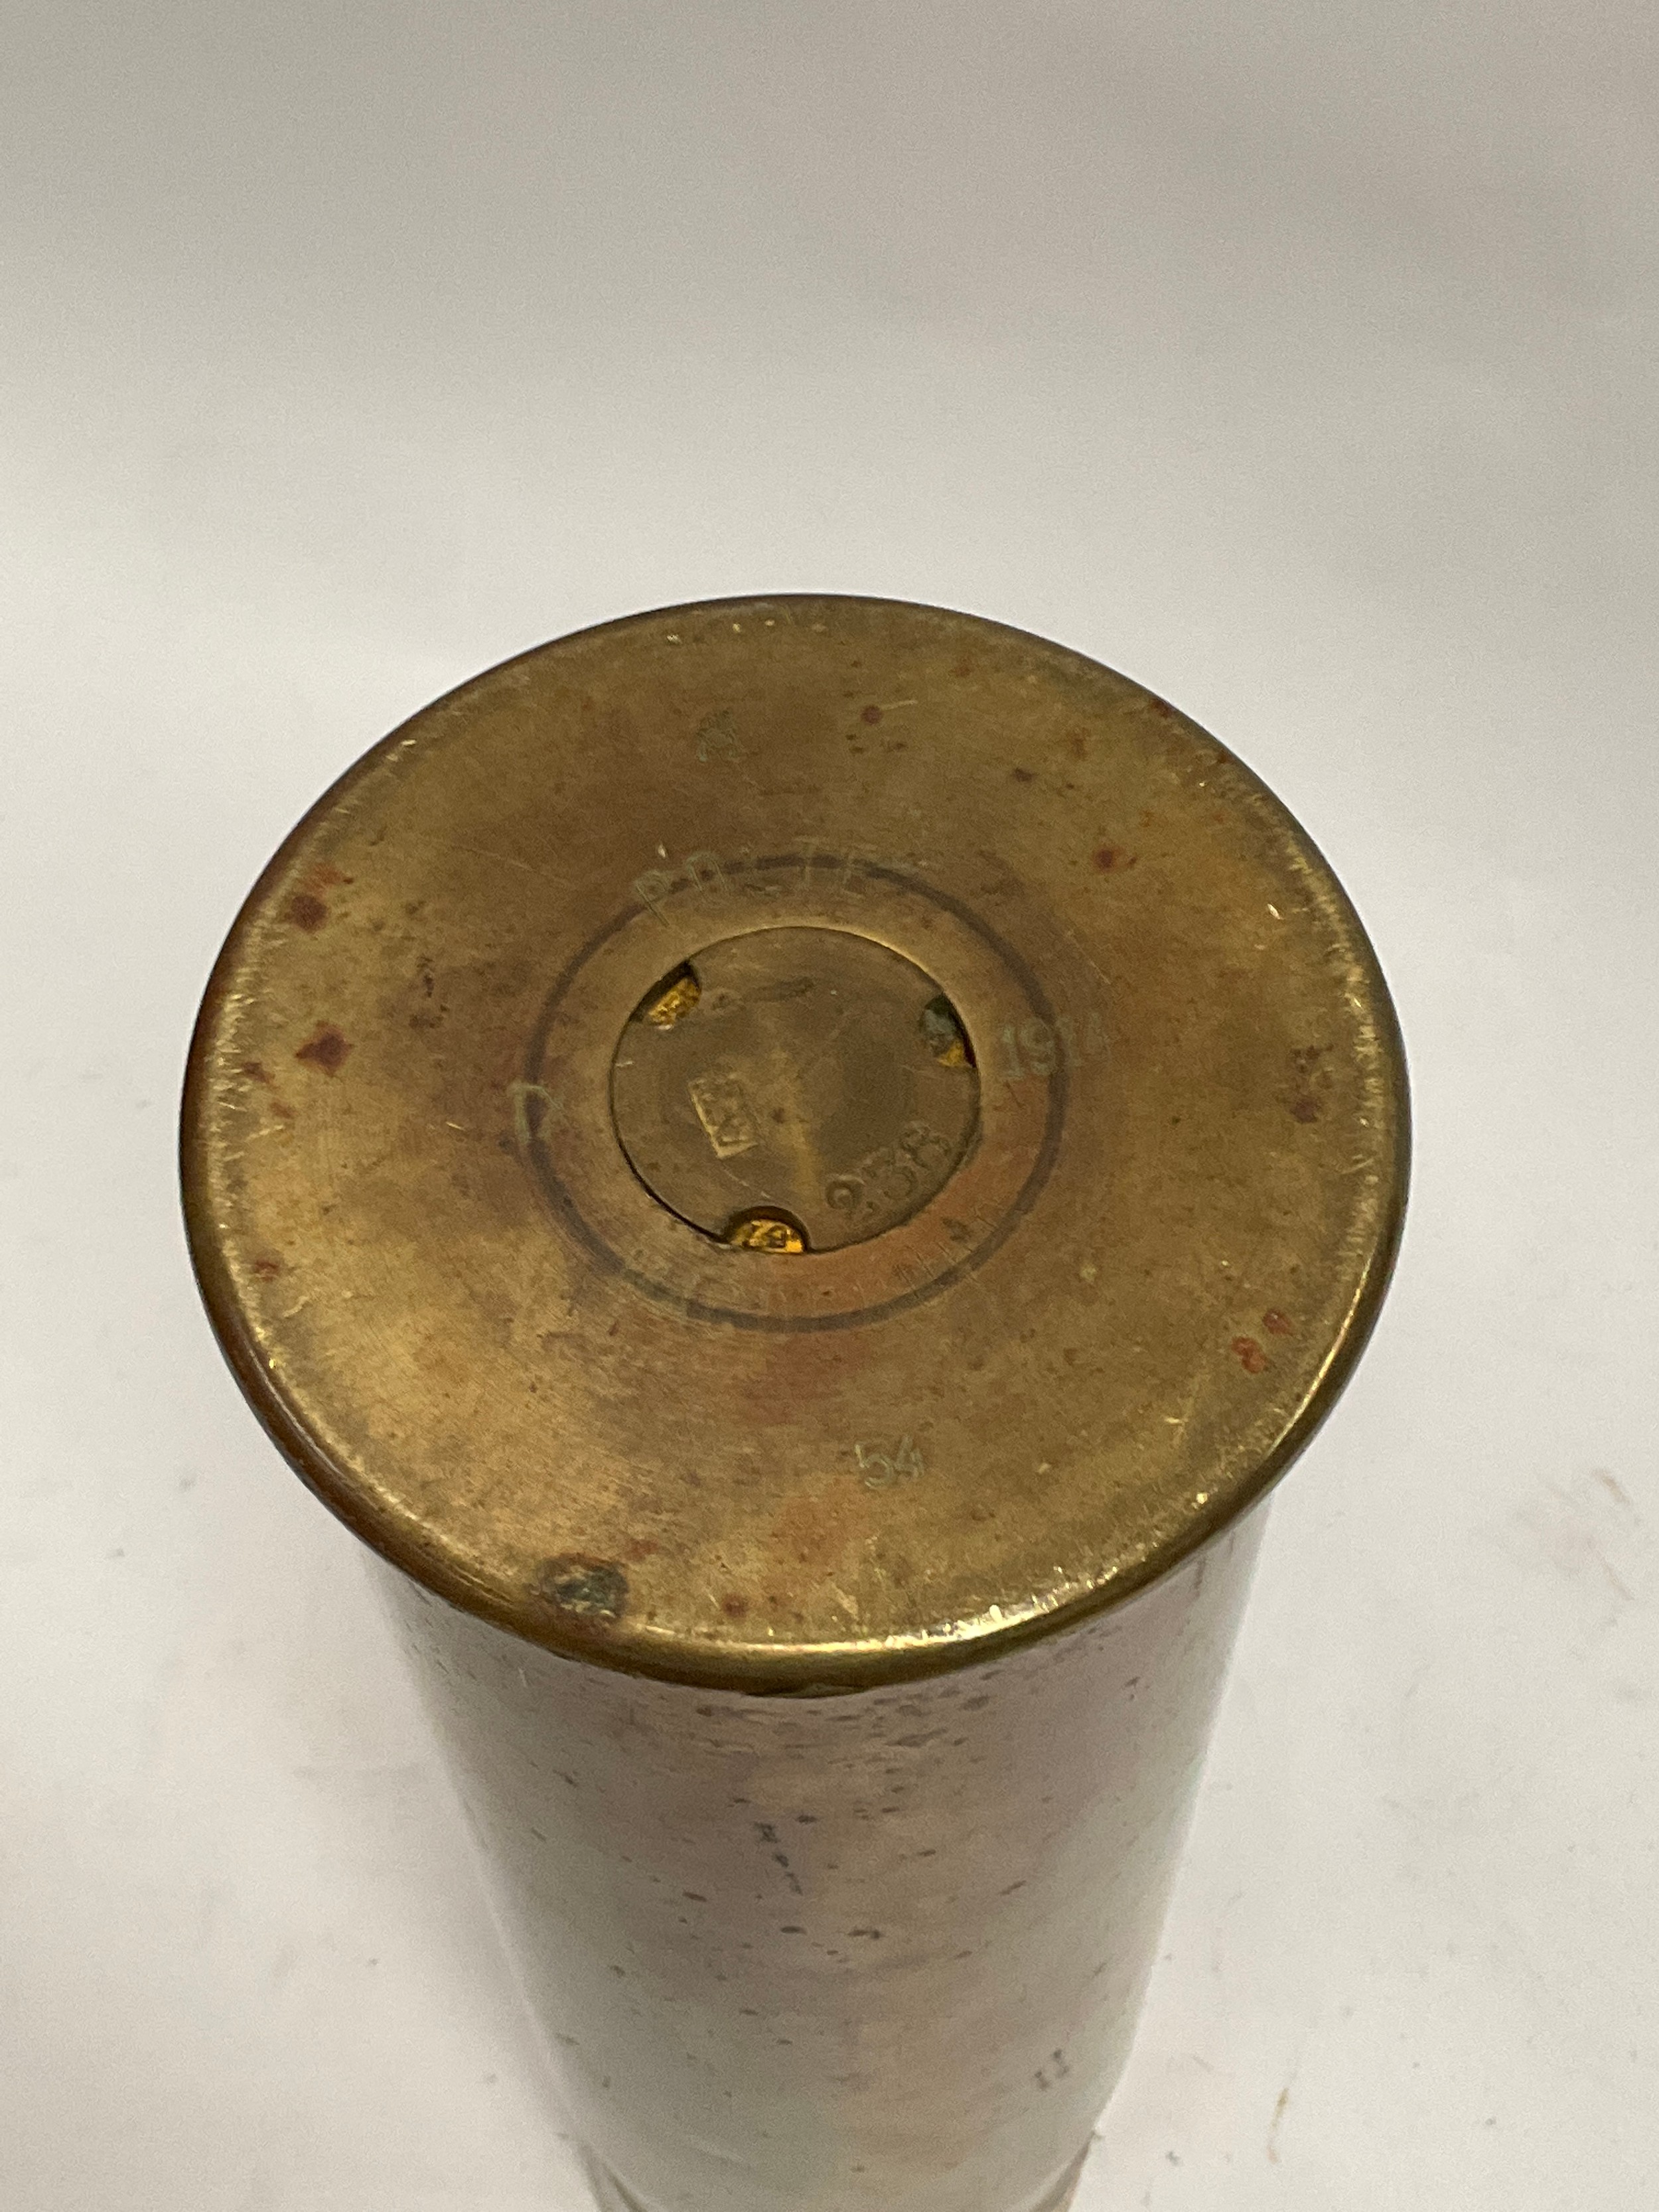 A scarce WWI German U-Boat 88mm shell case, dated 1914 - Image 2 of 2